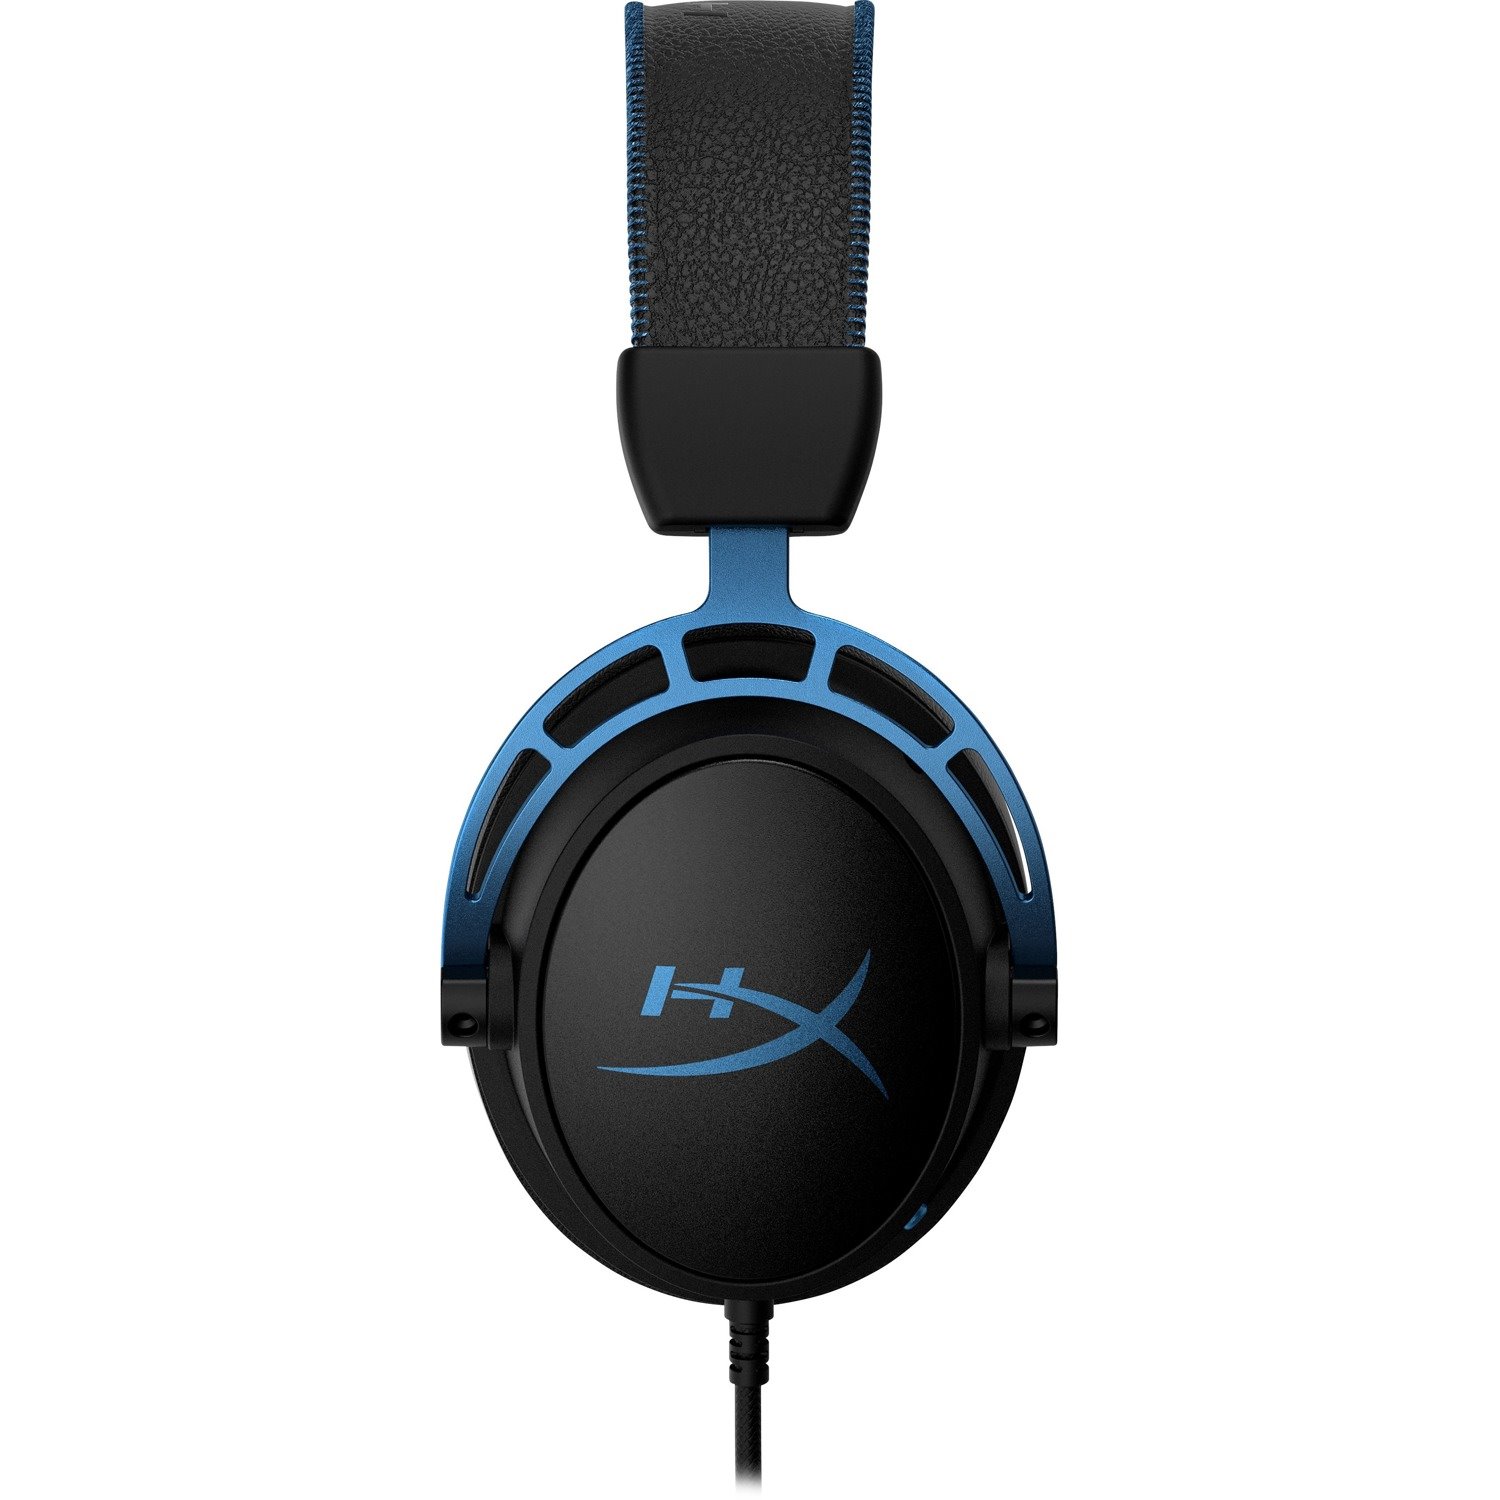 HP Cloud Alpha S Wired Over-the-ear Stereo Gaming Headset - Blue